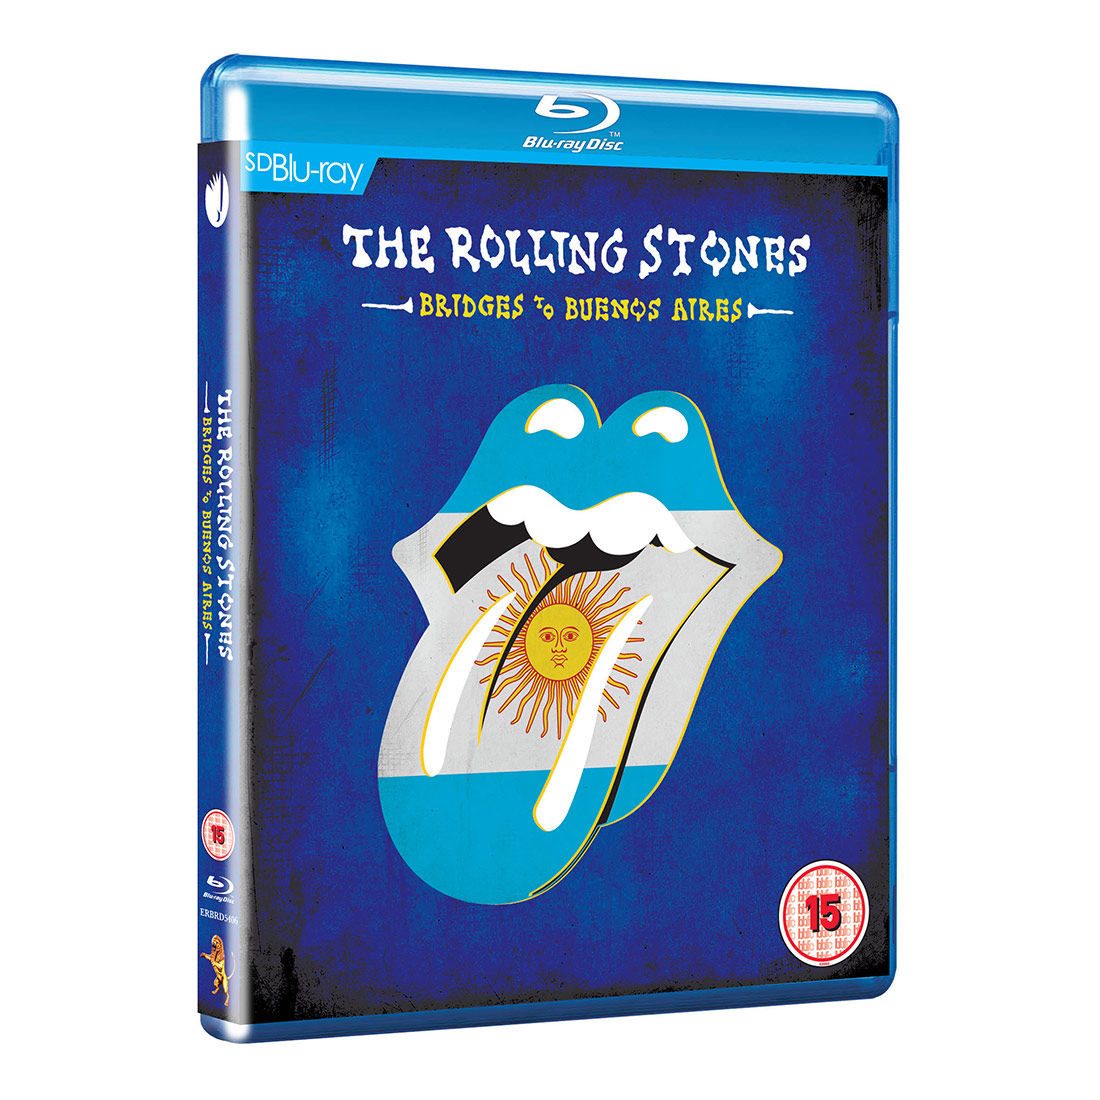 The Rolling Stones - Bridges To Buenos Aires: Blu-Ray